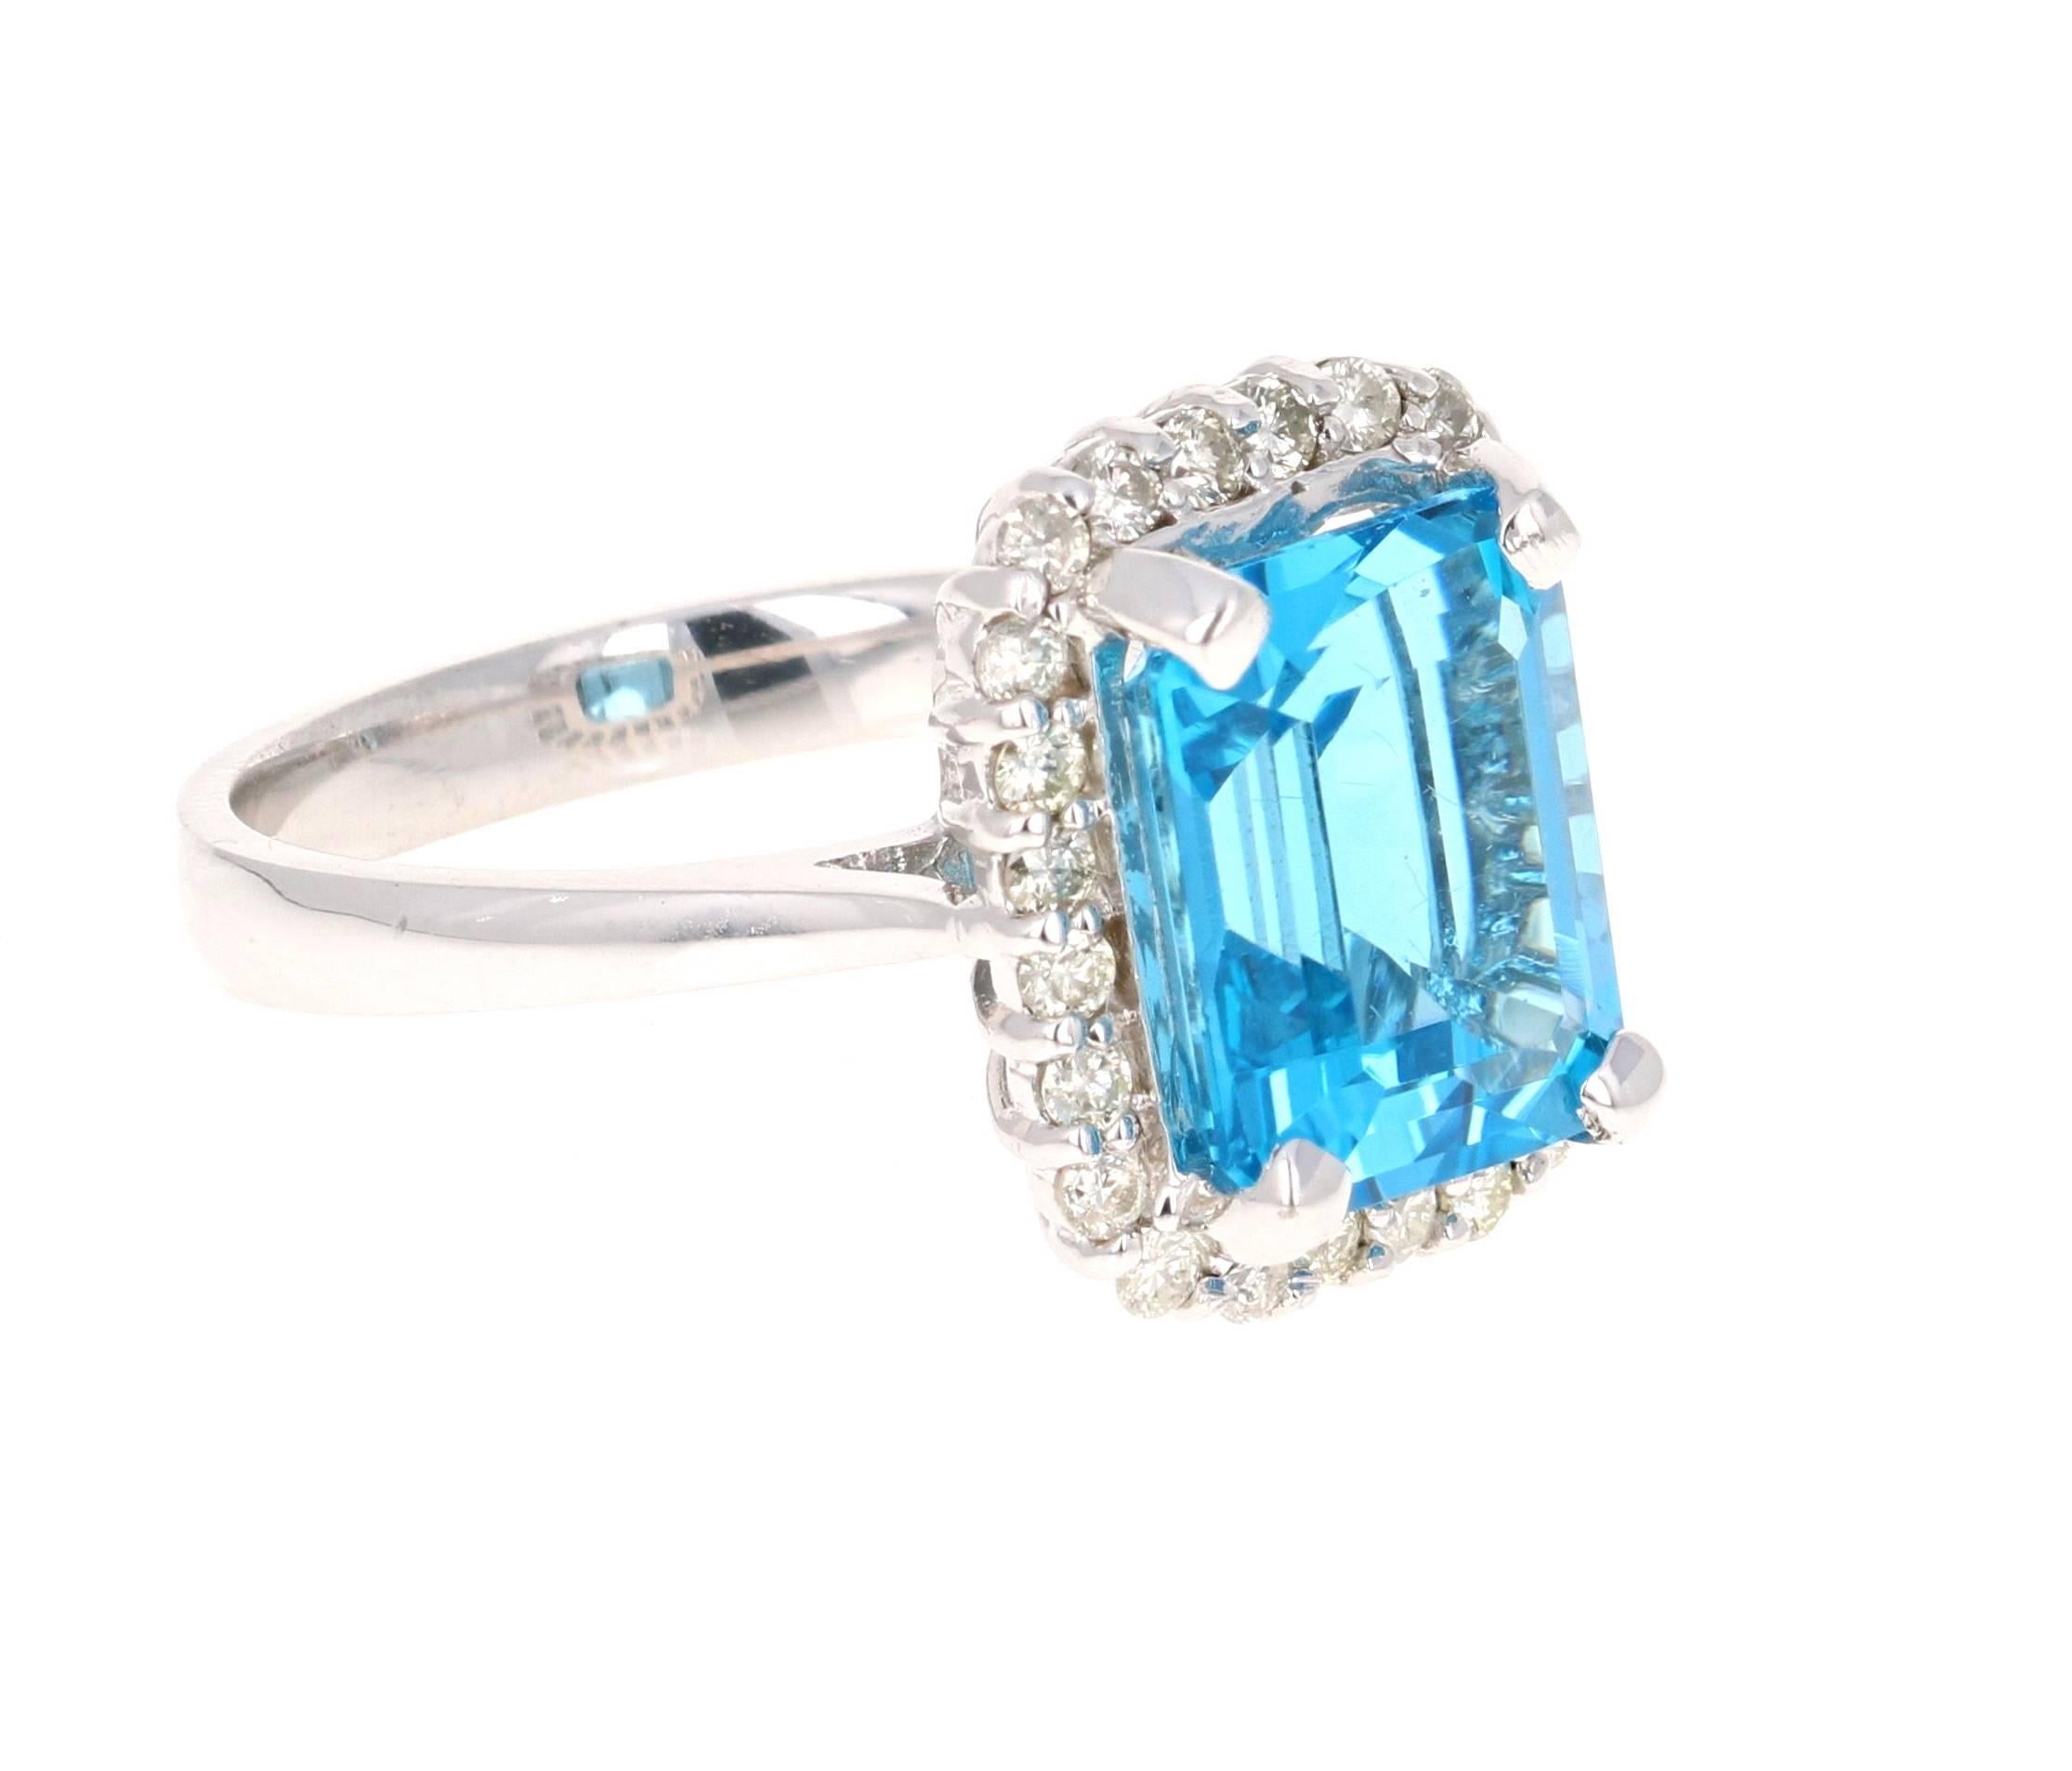 This beautiful Emerald Cut Blue Topaz and Diamond ring has a stunning 5.78 Carat Blue Topaz and its surrounded by 24 Round Cut Diamonds that weigh 0.44 Carats. The total carat weight of the ring is 6.22 Carats. The setting is crafted in 14K White